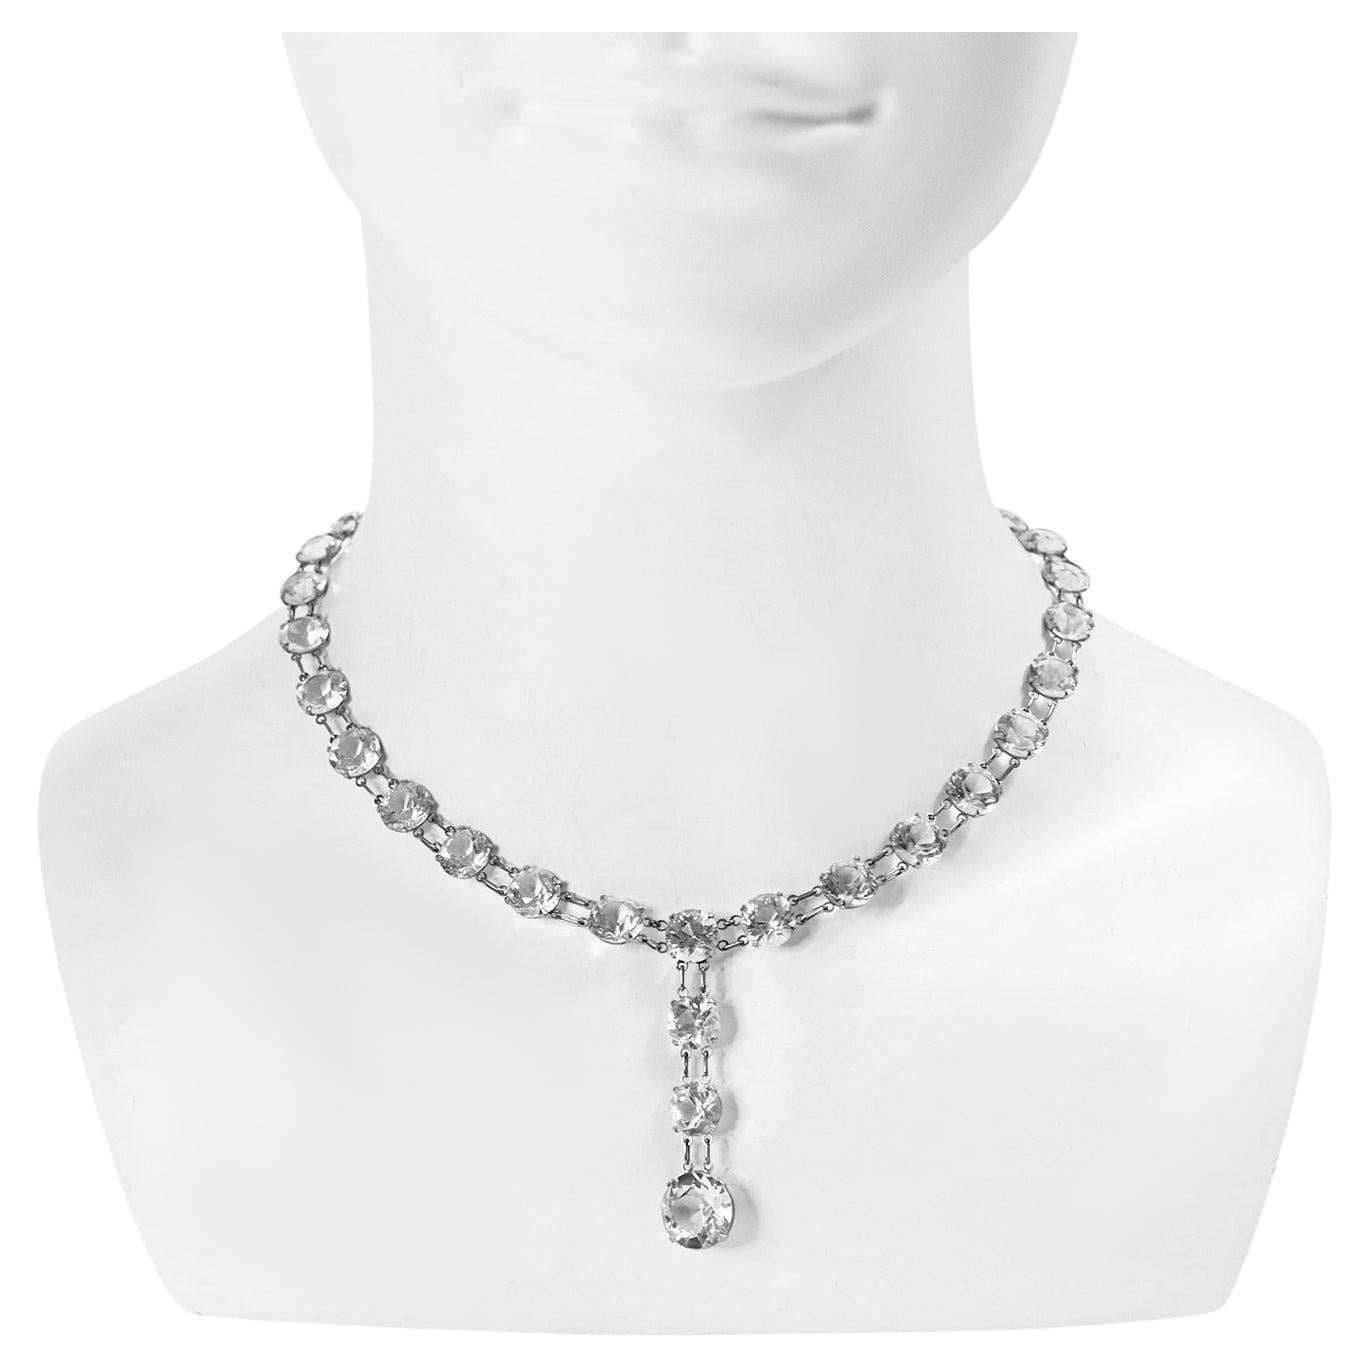 Women's or Men's Vintage Open Back Crystal Necklace with Dangling Piece Circa 1920s For Sale